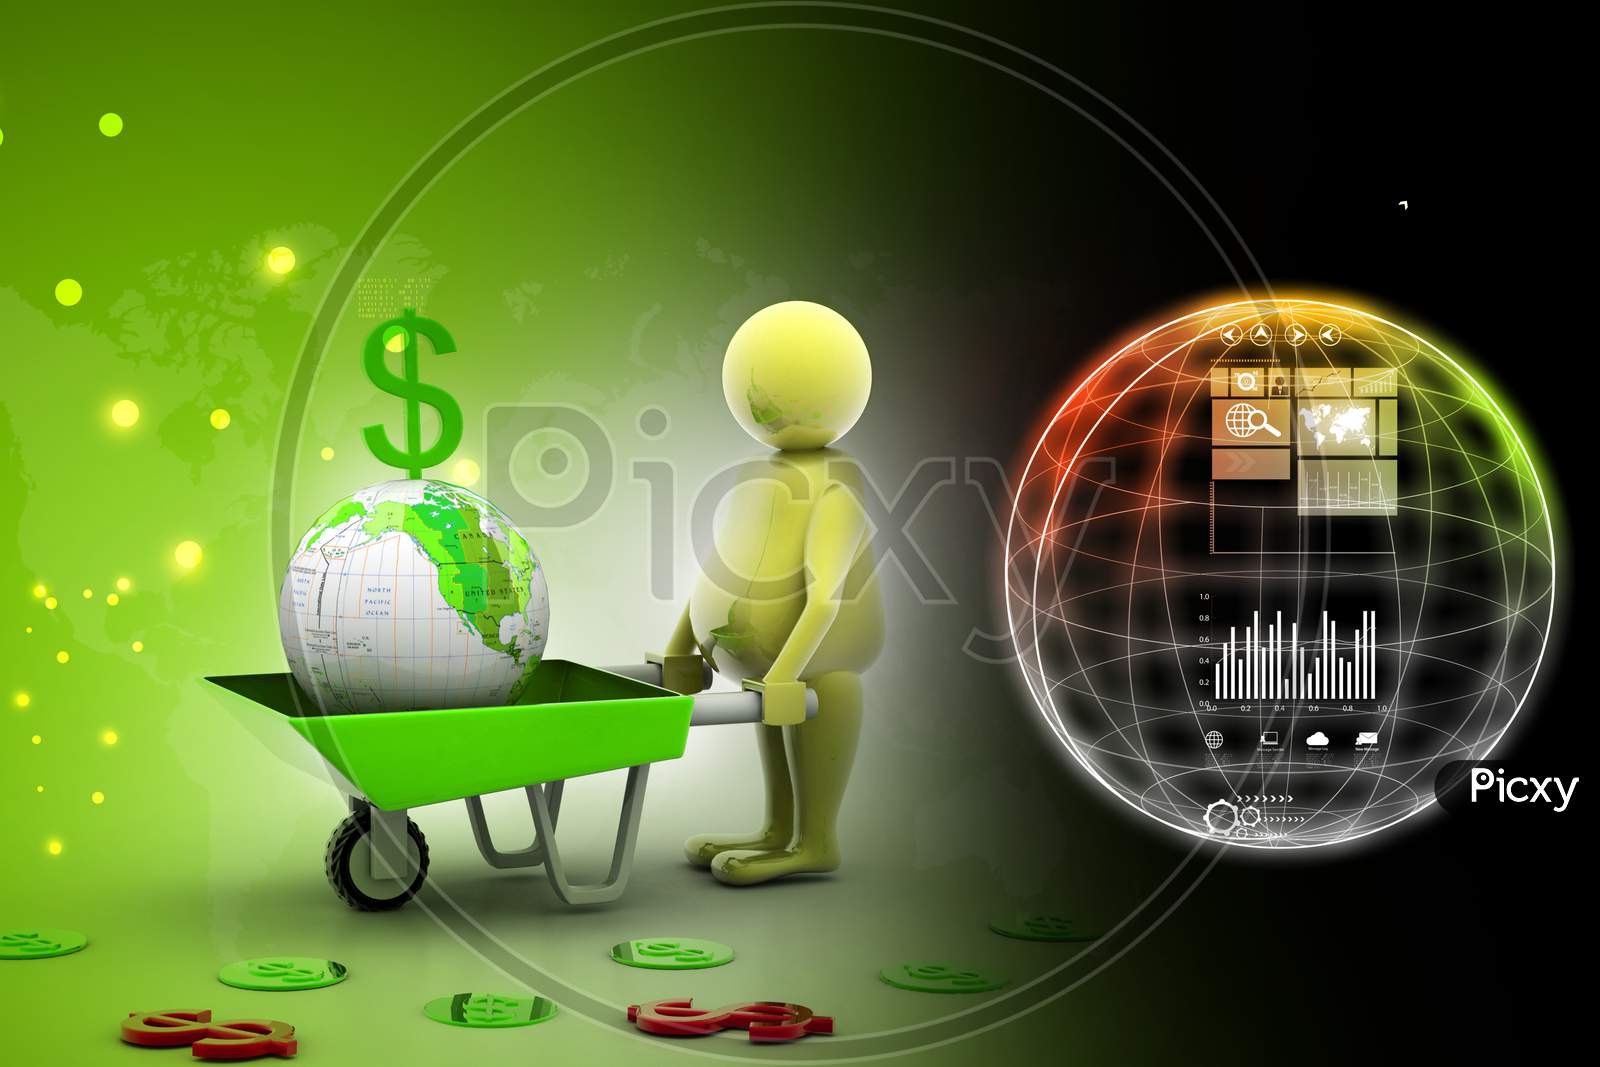 3D Multi Use Gold Coin In And Earth Wheelbarrow. Business Growth And Profit